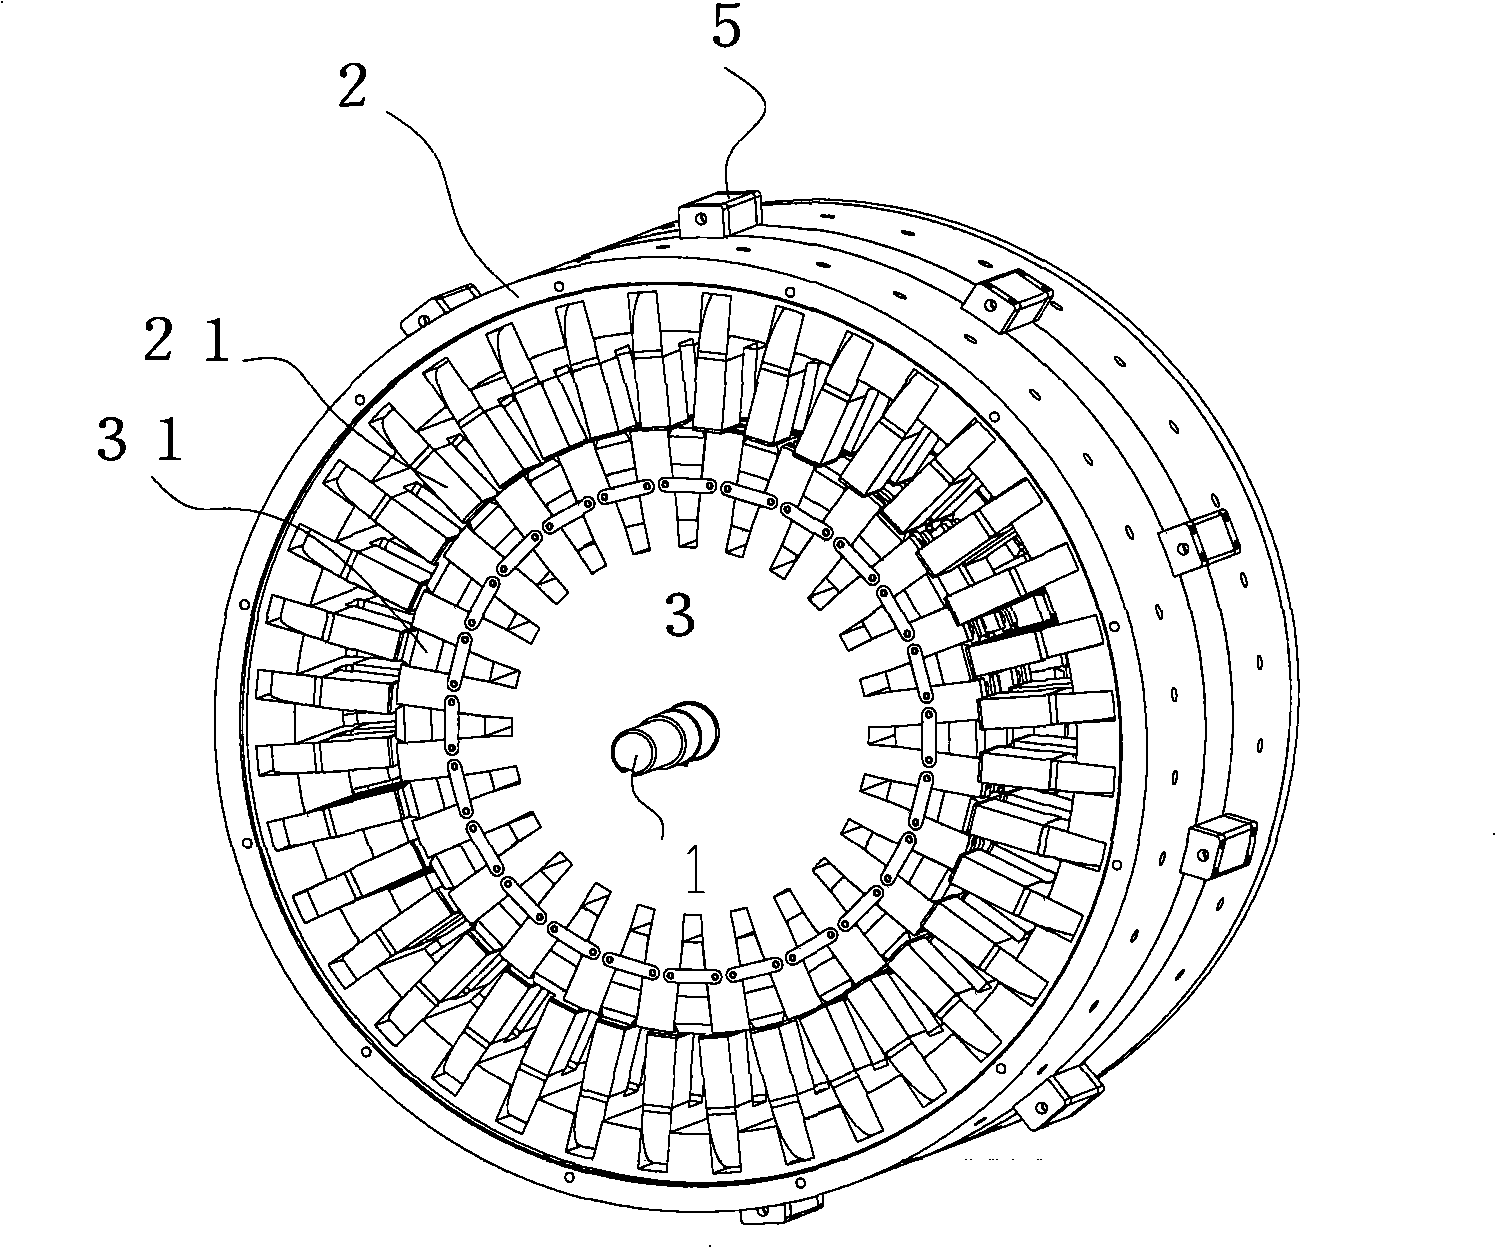 Frequency stabilization control system of permanent magnet wind-driven generator capable of adapting to changing torque